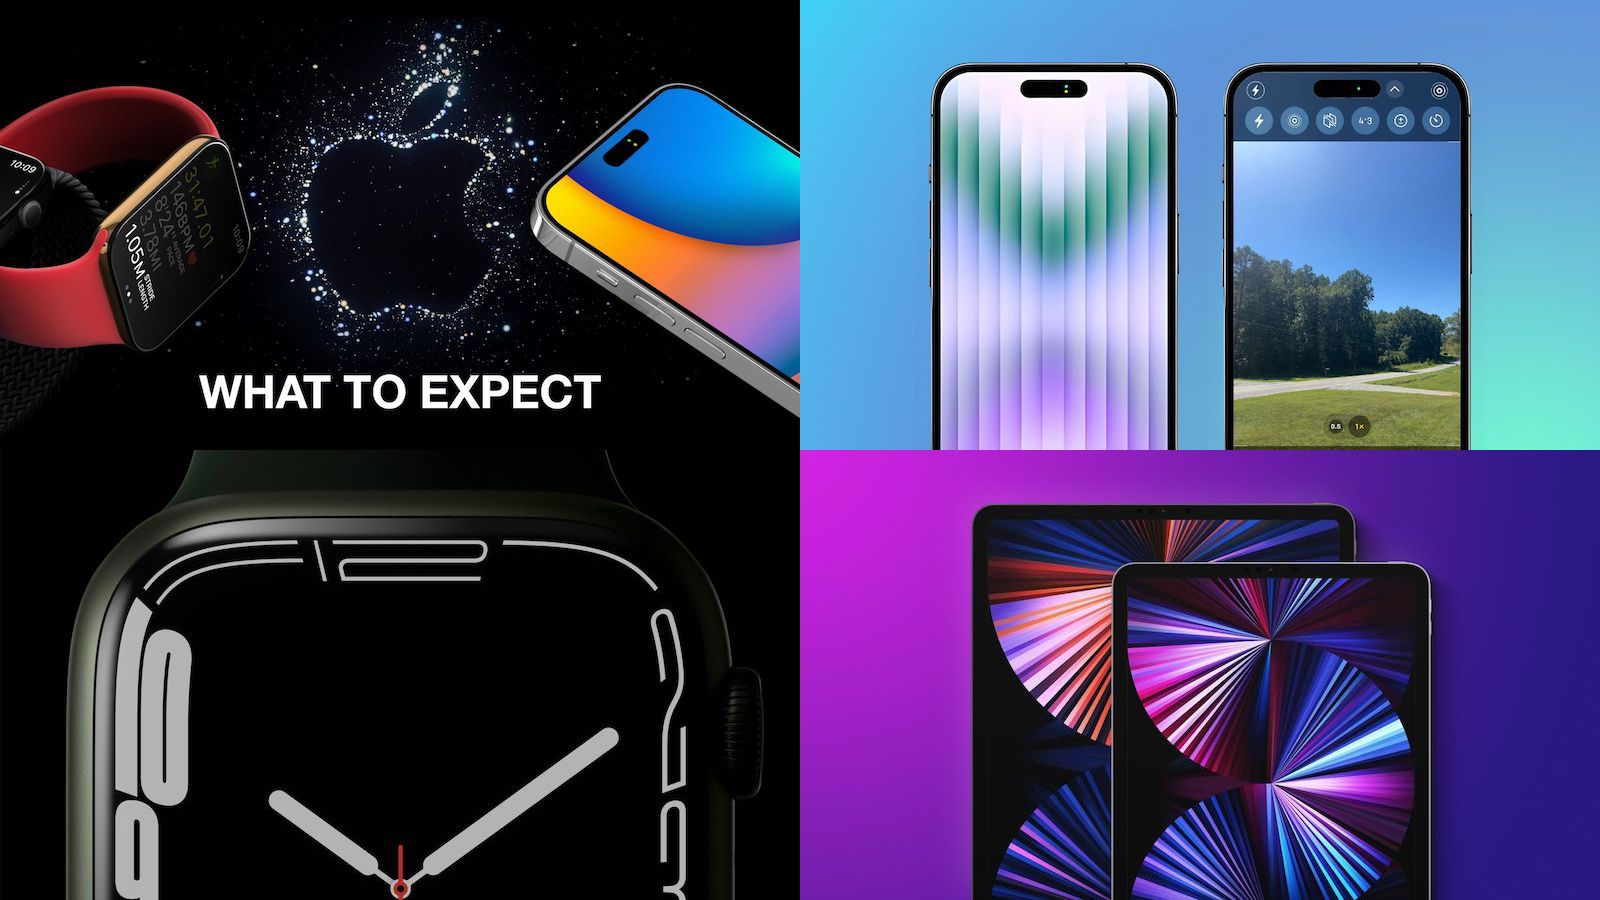 Top Stories: ‘Far Out’ Apple Event Preview With iPhone 14 and Apple Watch Pro Rumors